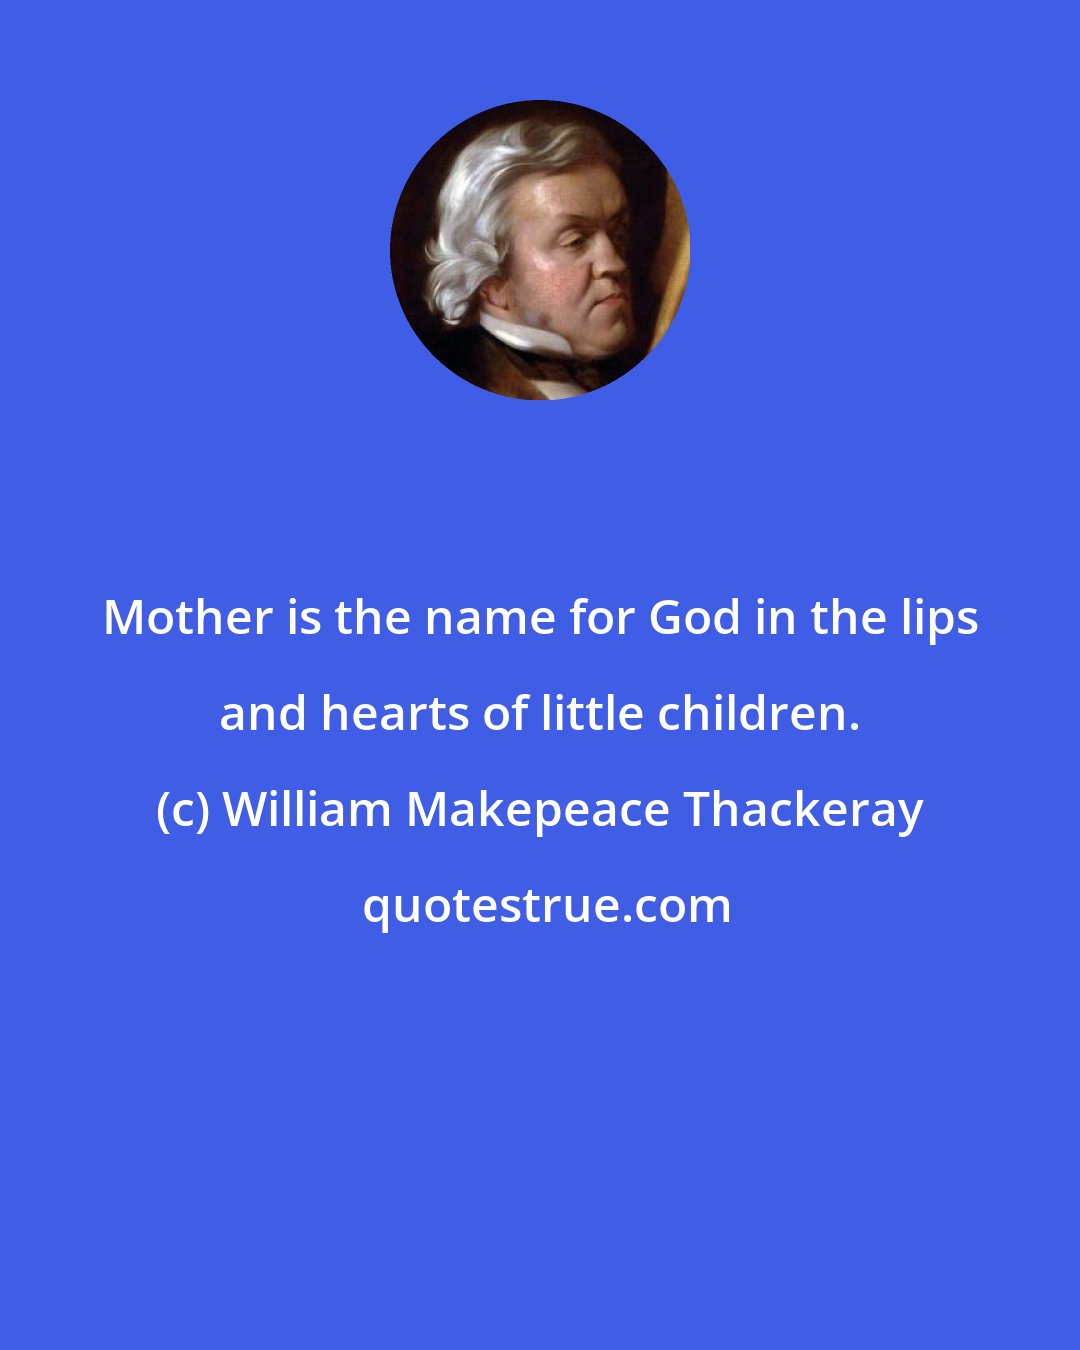 William Makepeace Thackeray: Mother is the name for God in the lips and hearts of little children.